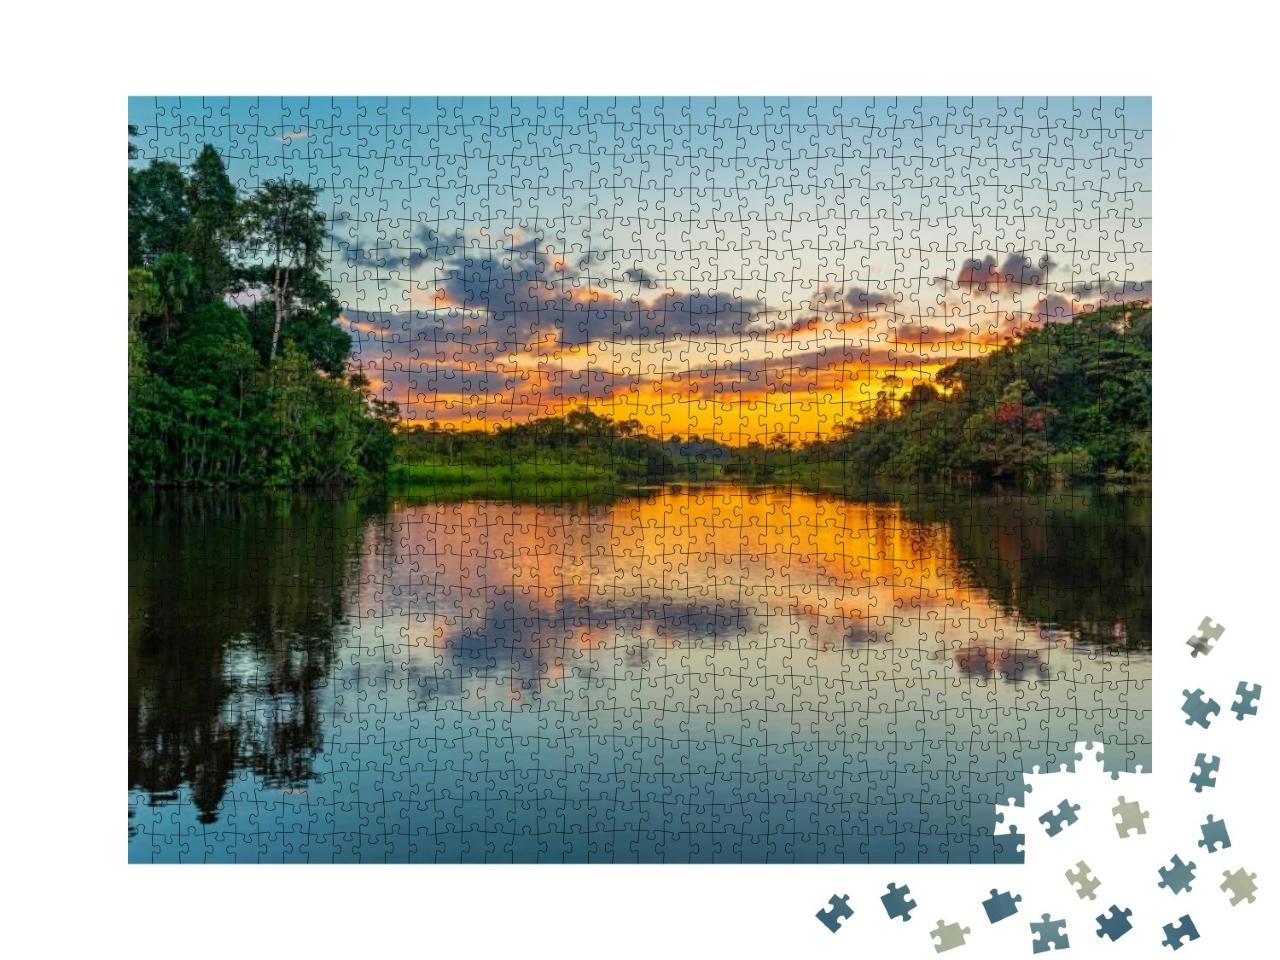 Reflection of a Sunset by a Lagoon Inside the Amazon Rain... Jigsaw Puzzle with 1000 pieces